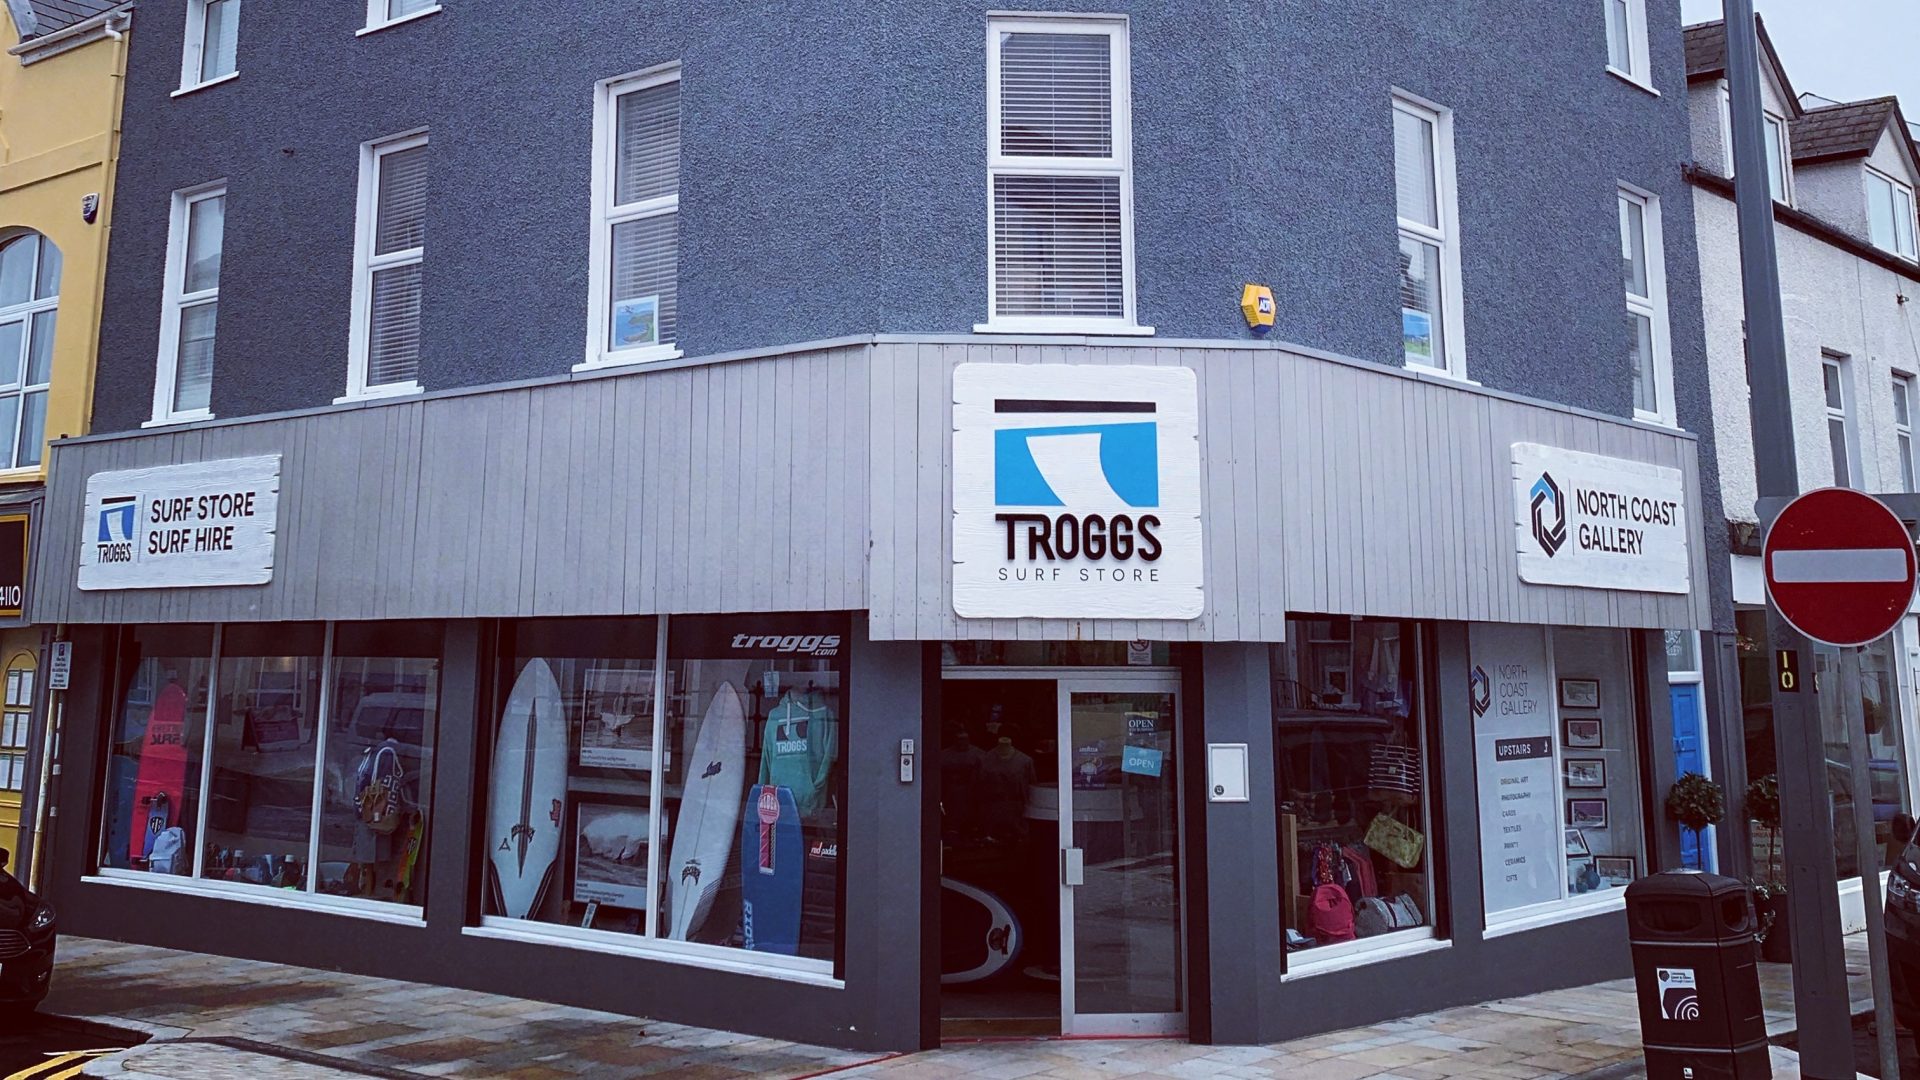 Troggs store front header